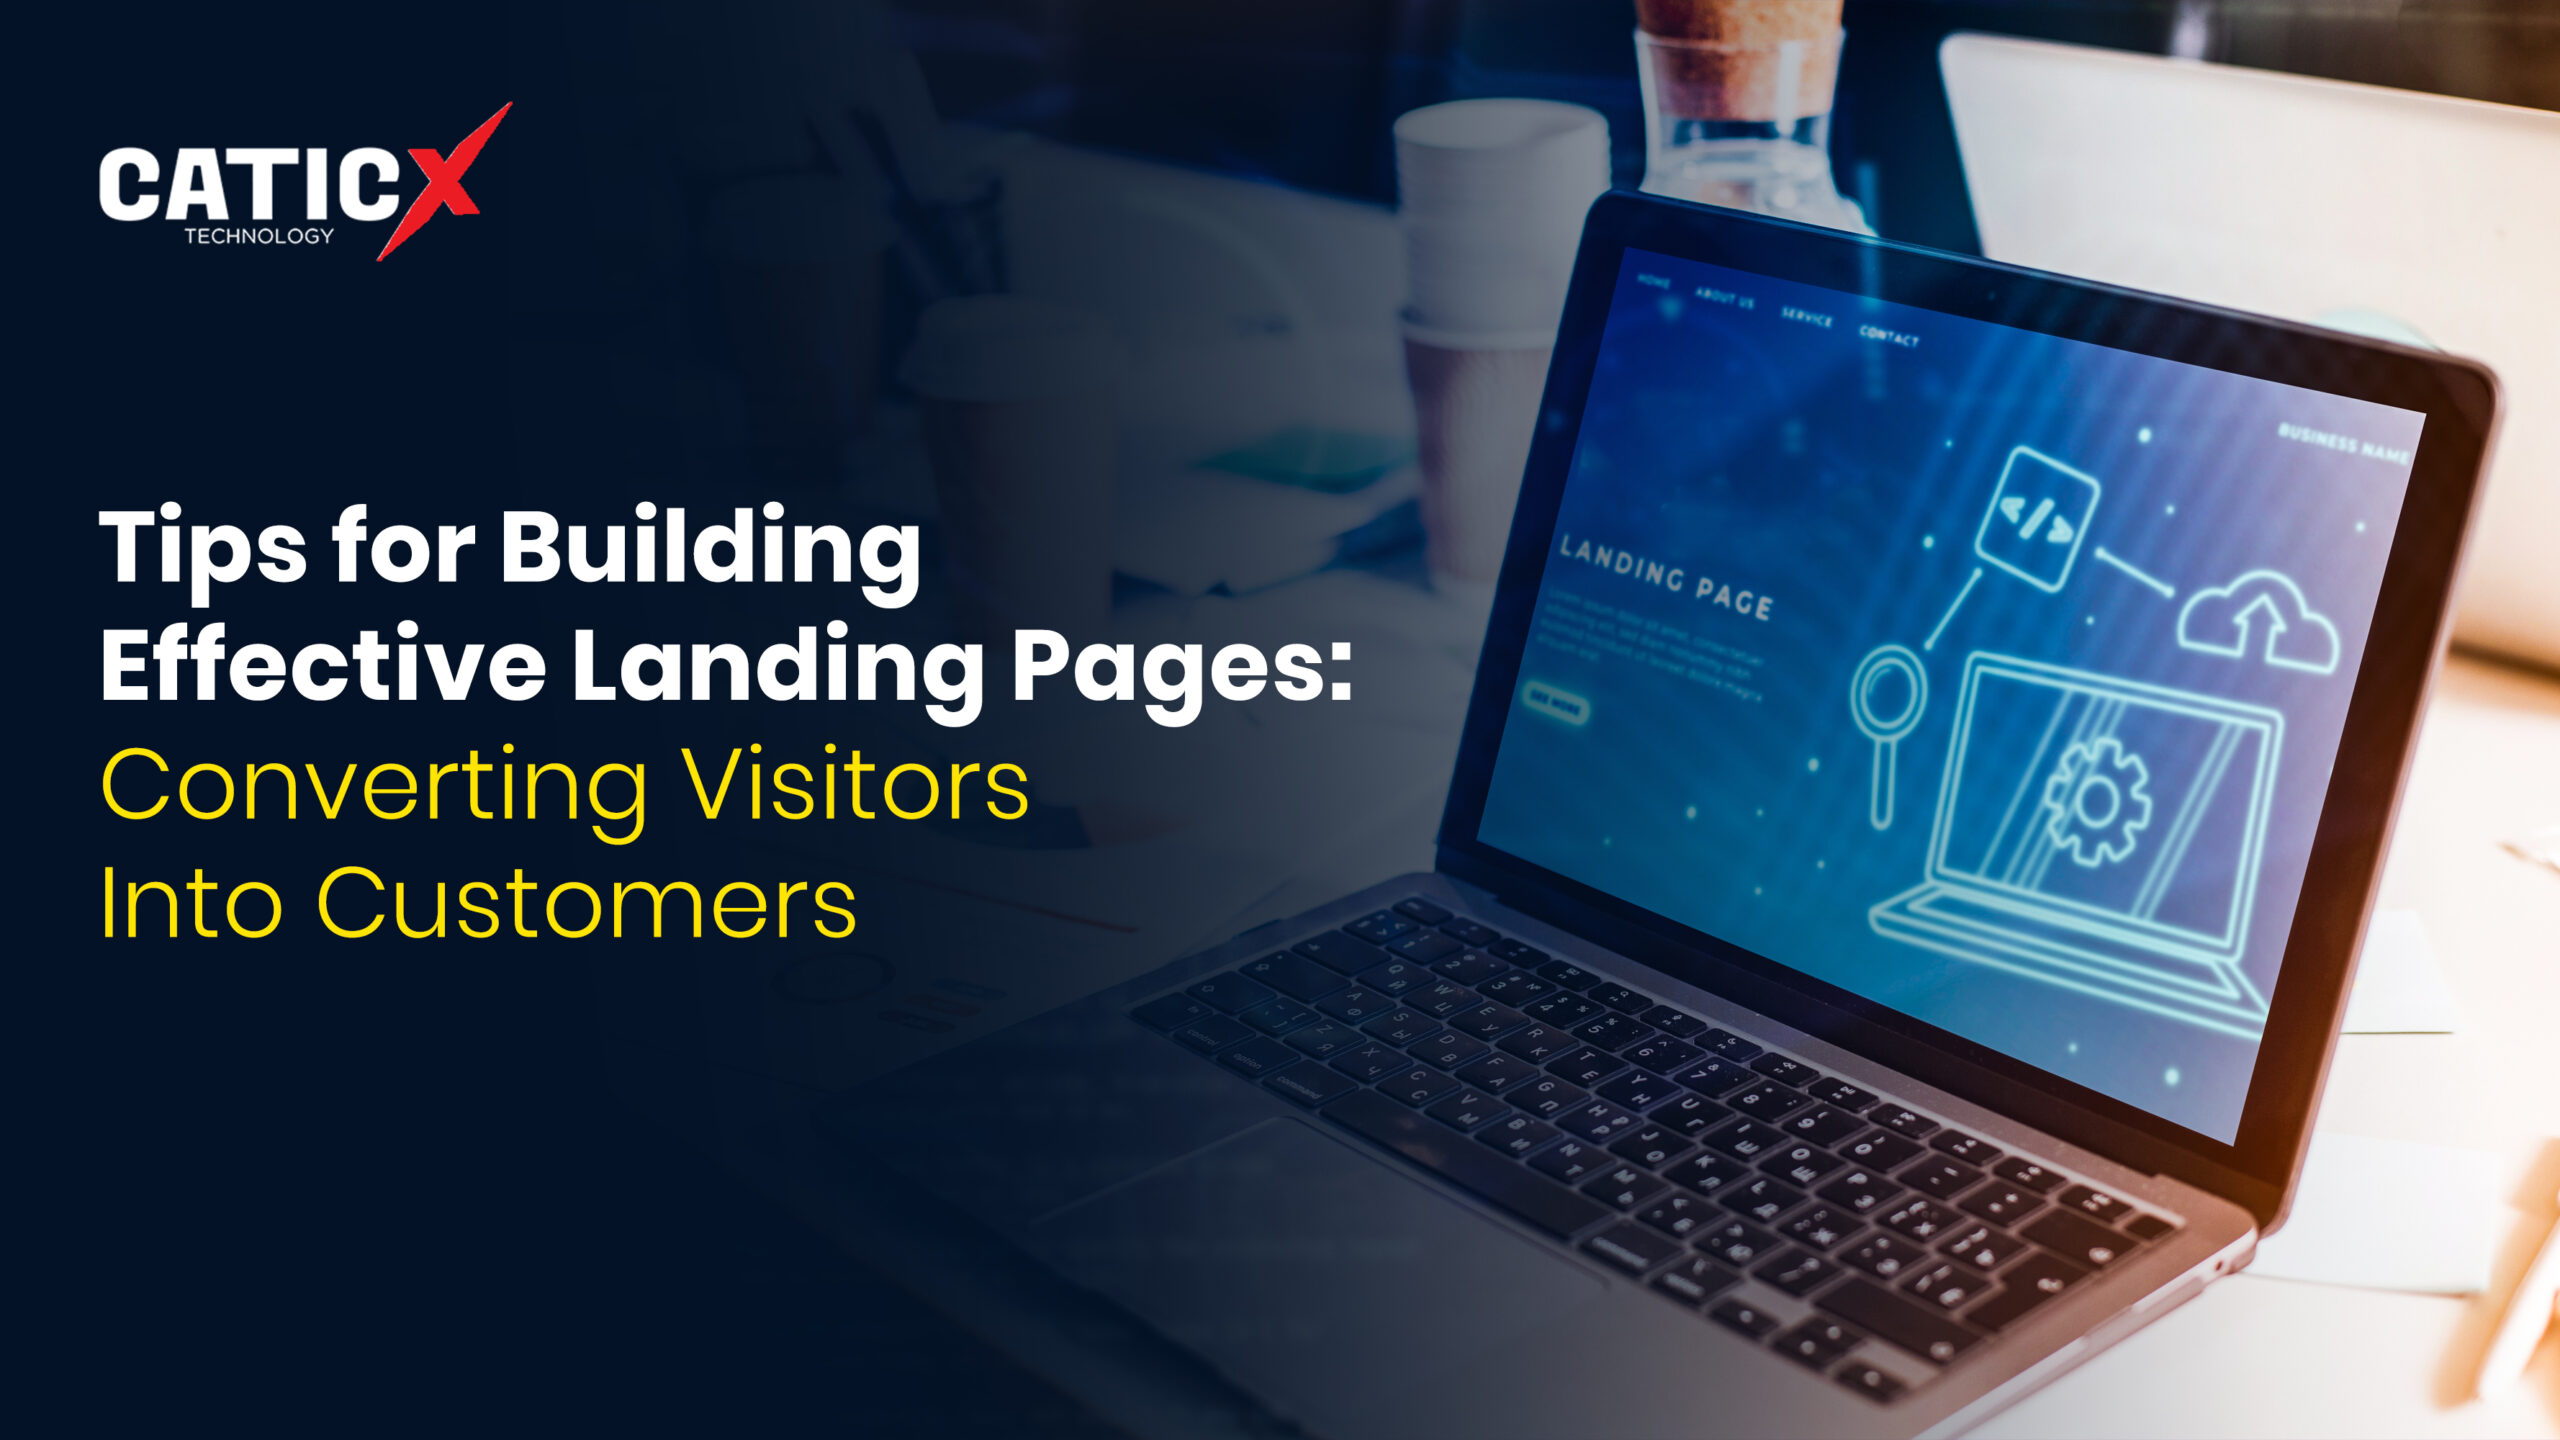 Tips for Building Effective Landing Pages: Converting Visitors into Customers